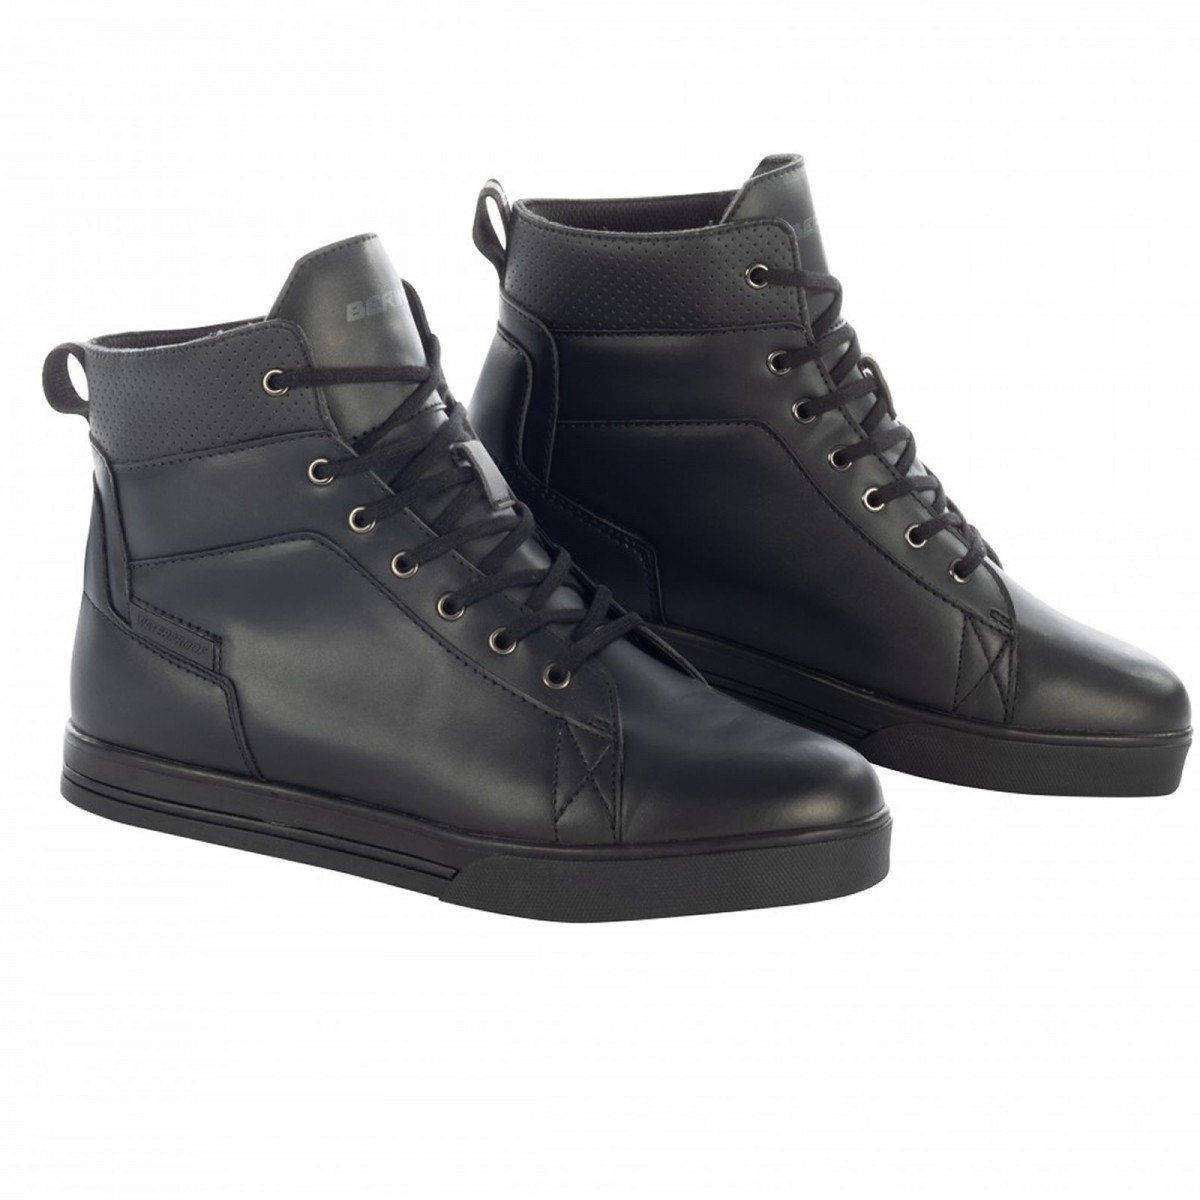 Image of Bering Sneakers Indy Black Talla 40